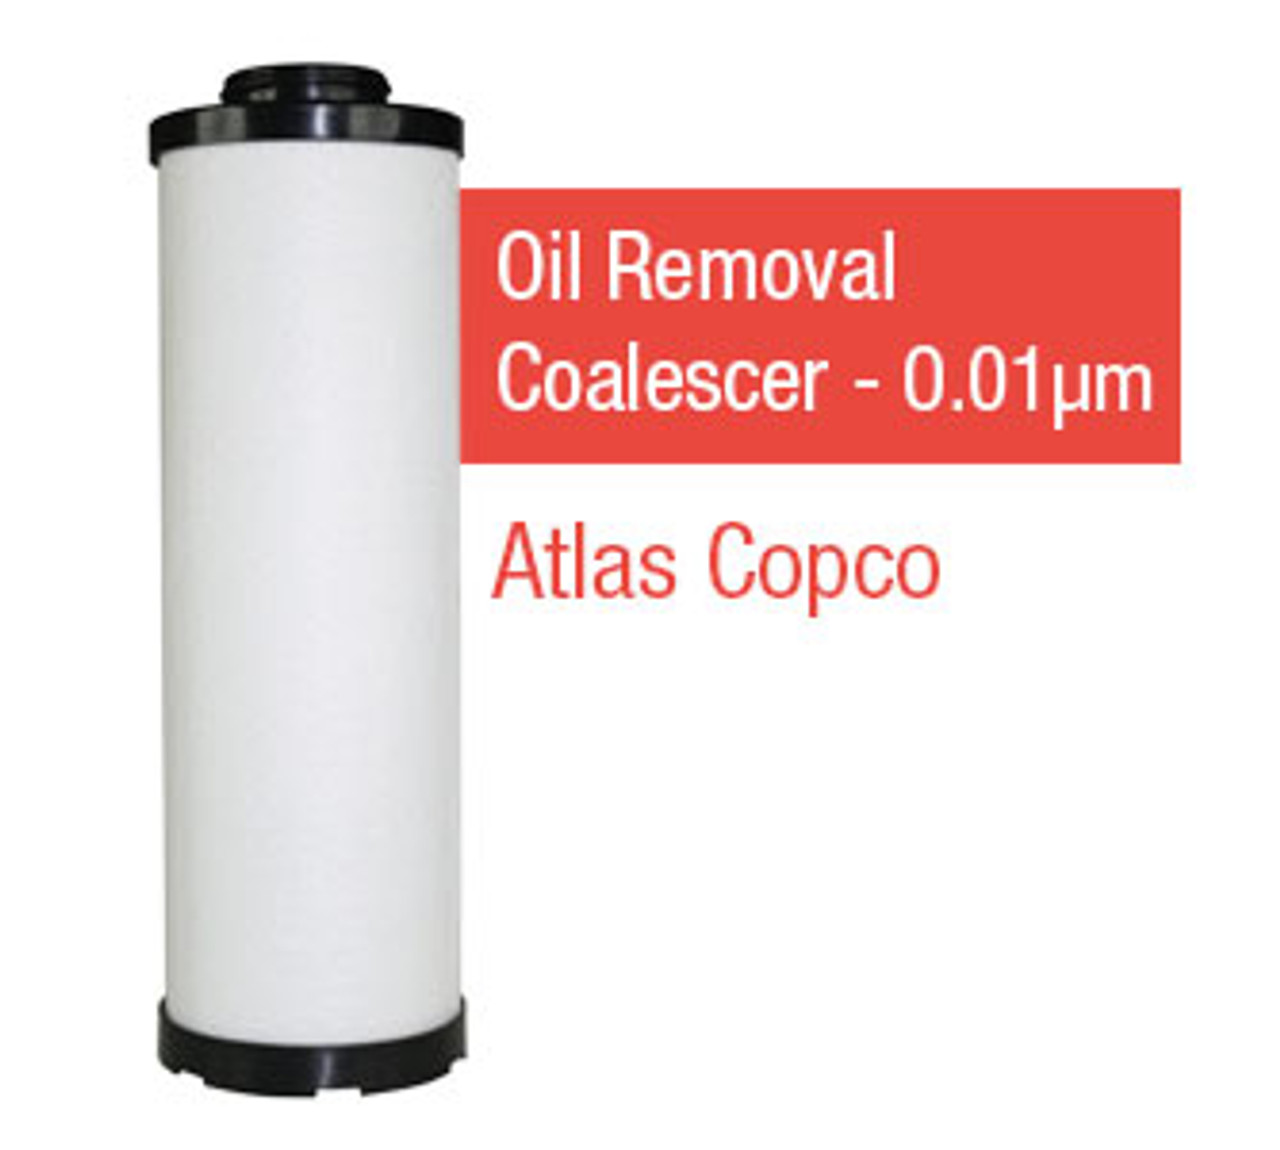 Atlas Copco Grade Y - Oil Removal Coalescer - 0.01 Micron OEM Part No. 2901019800/1202625903 for Housing PD65 - K145AA/D085AA 0.01 DH Hsg No AA-0145G Atlas Hsg: PD65, AC No 2901-0198-00 Hsg No PD65, Atlas  Part No 1202-6259-03 Hsg No PD65, Atlas  Part No